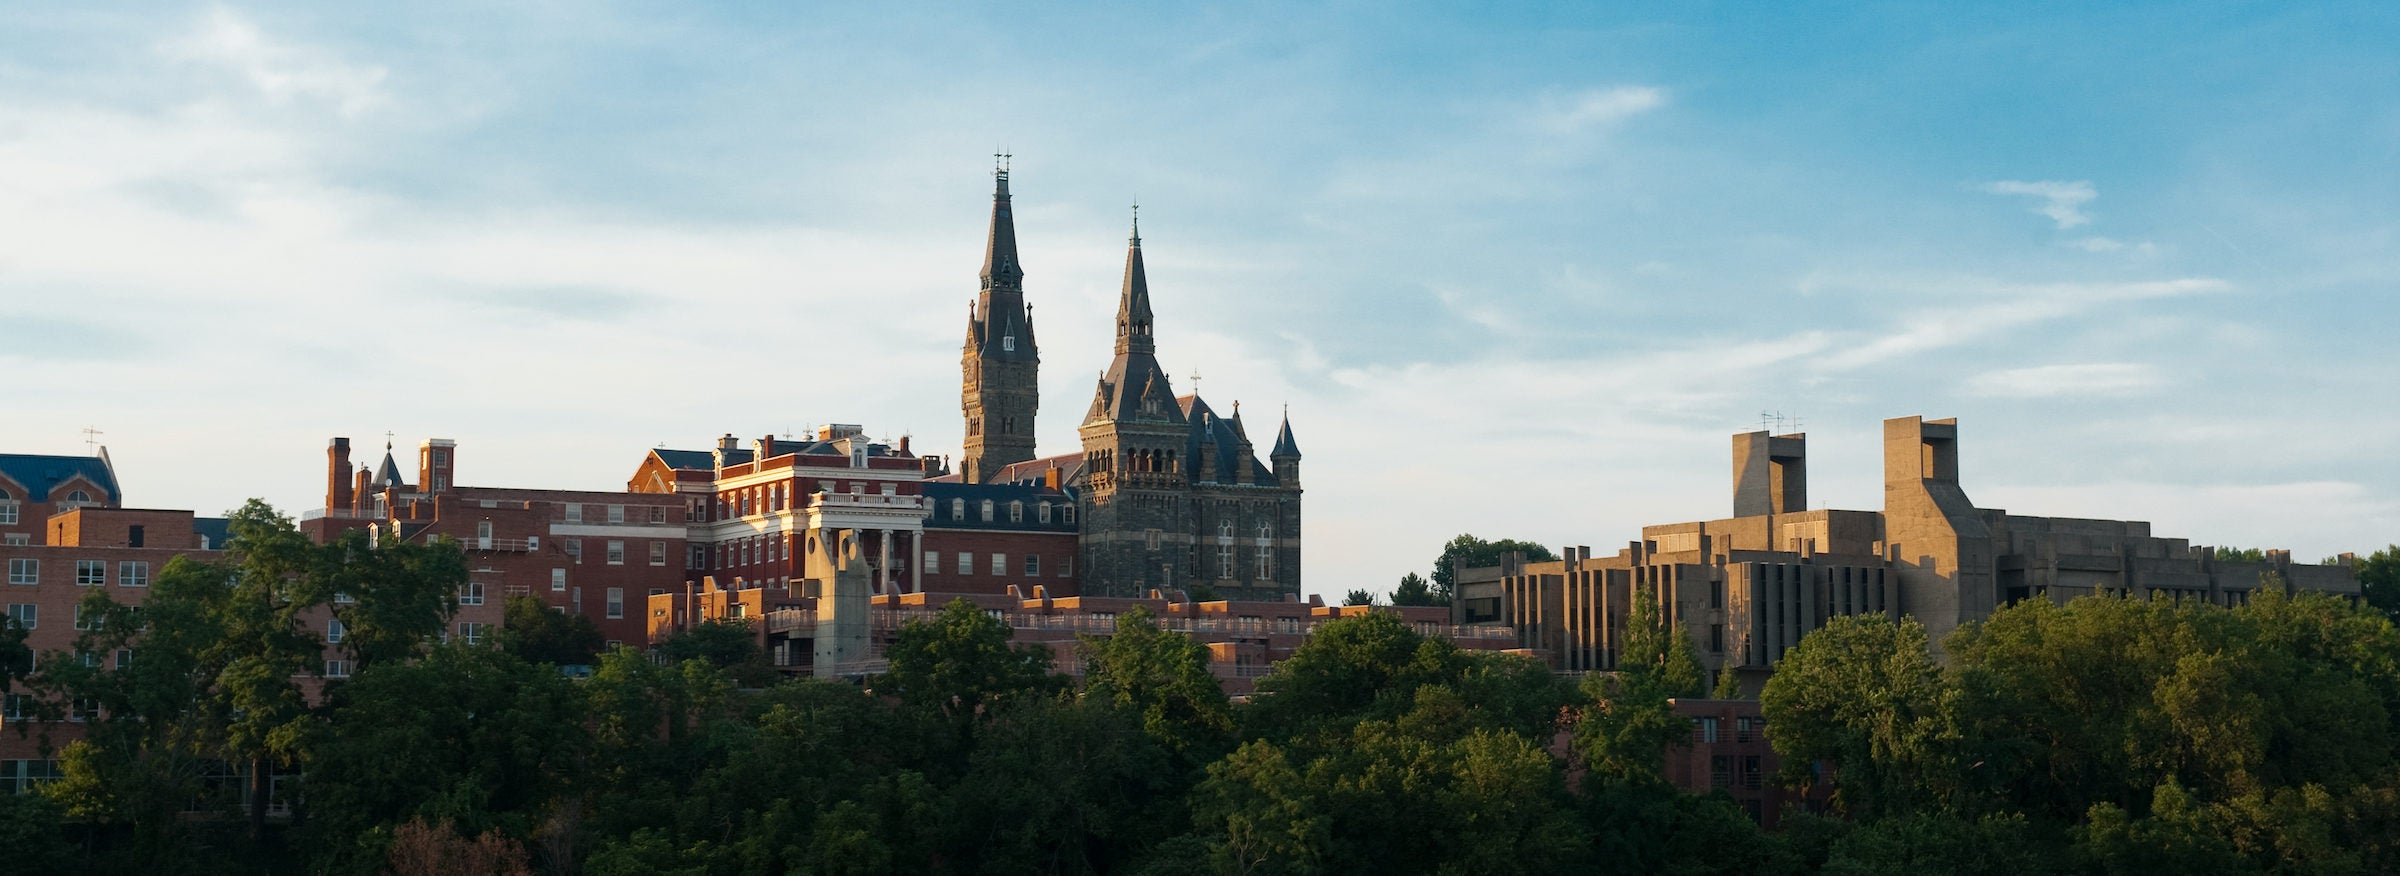 Georgetown University campus photographed from a distance